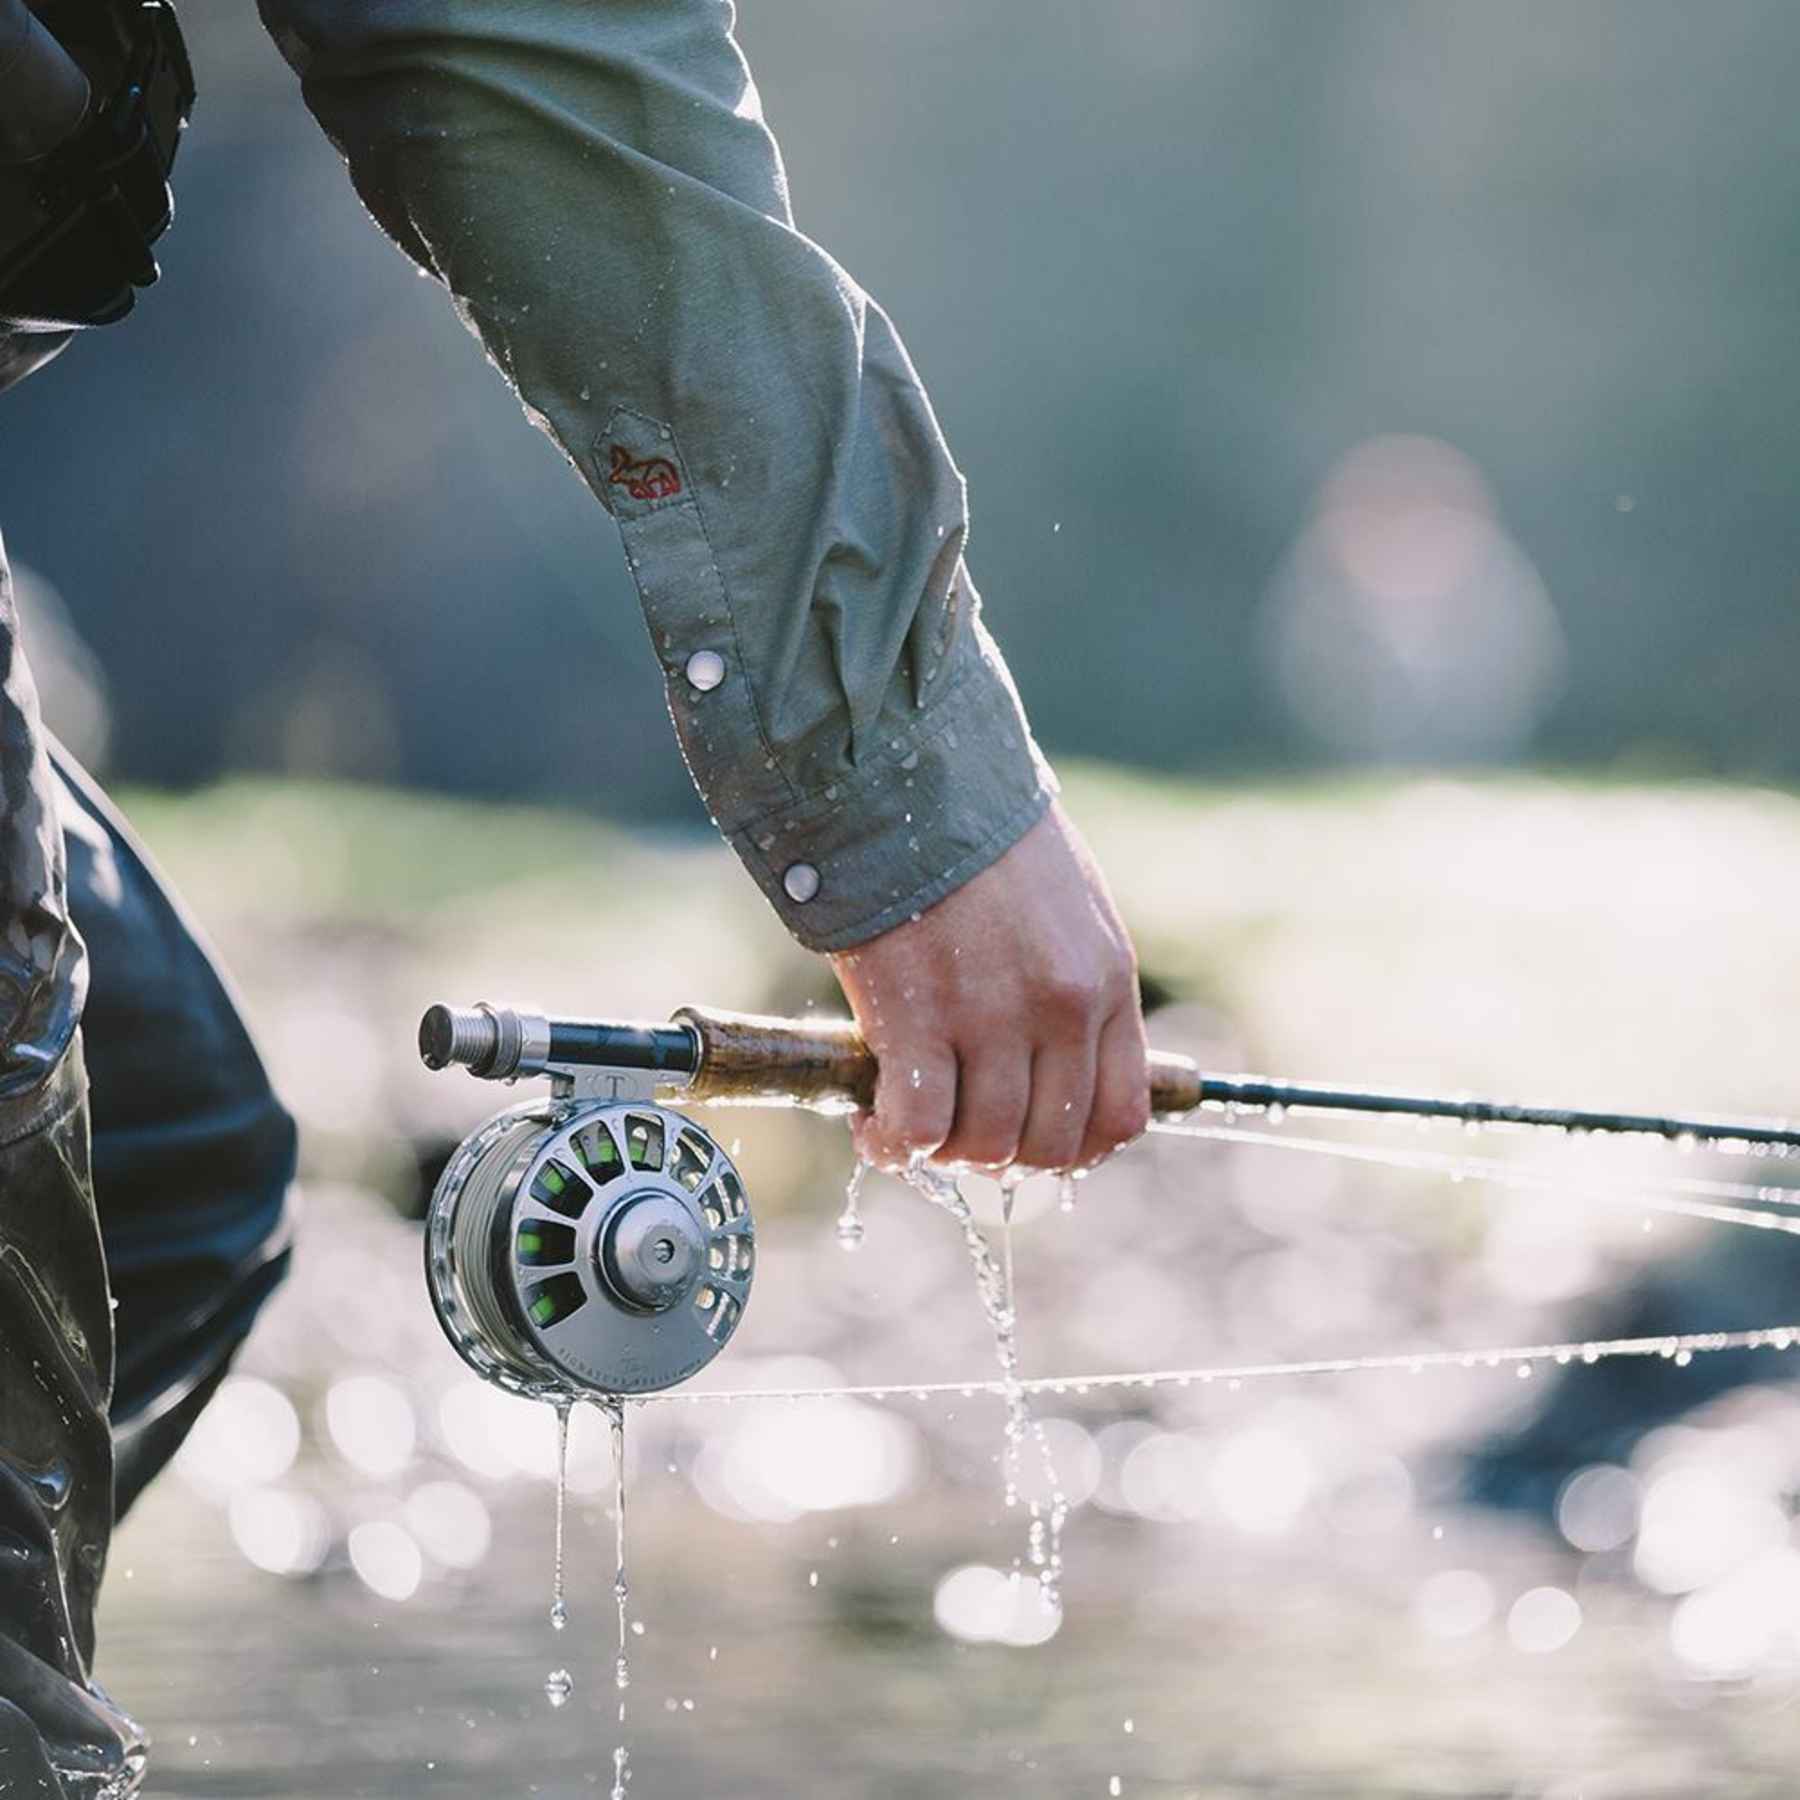 New fly fishing apparel co, Western Rise, prepped to launch